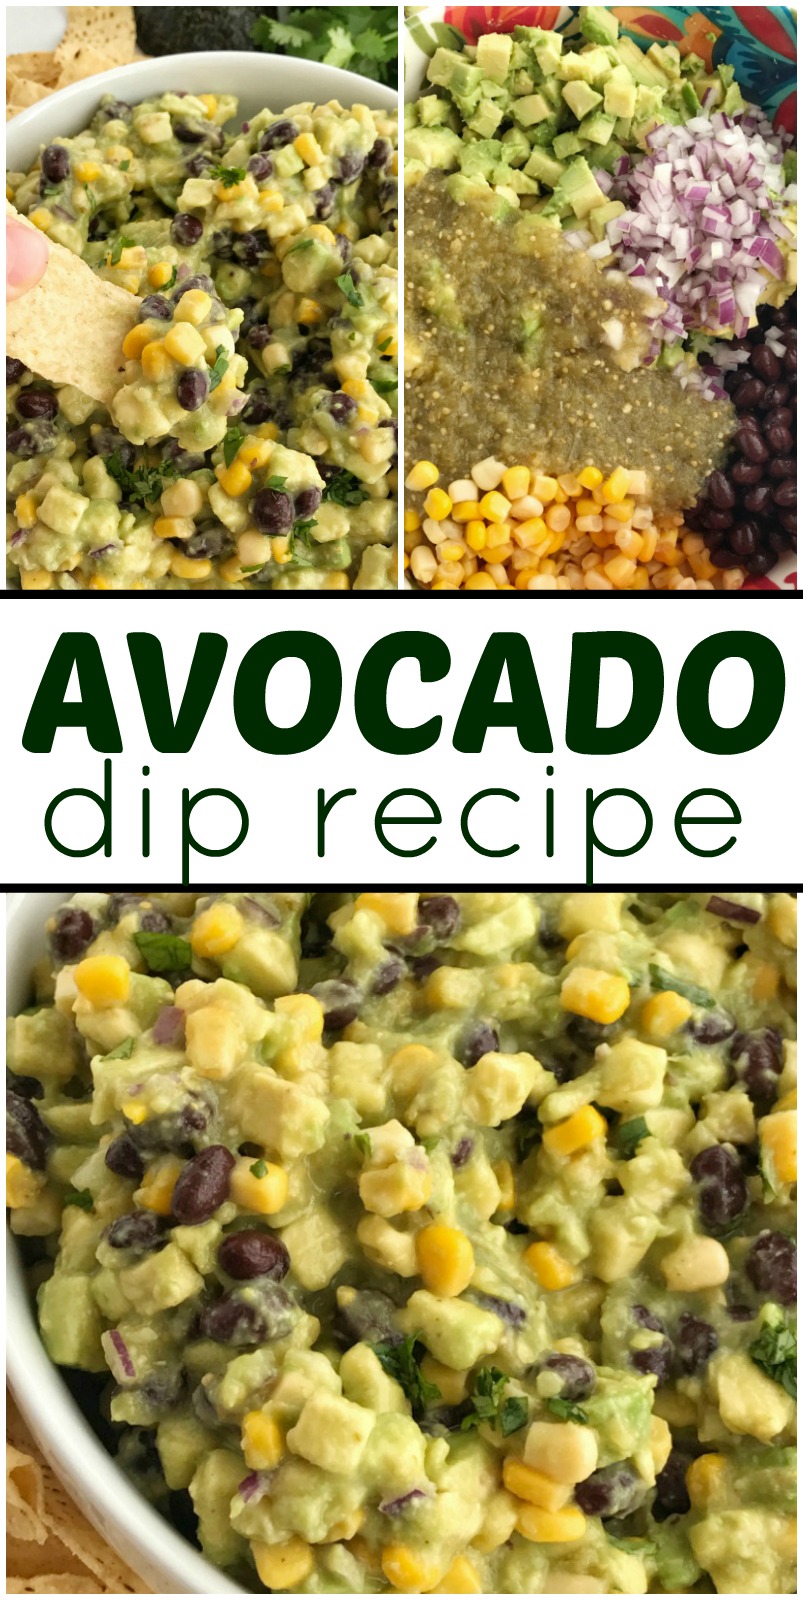 Avocado Dip | Avocado Recipe | Dip Recipe | Avocado Dip is packed full with chunky avocados, corn, black beans, red onion, and salsa verde. So easy to make you only need 5 ingredients. #partyrecipes #dips #avocadorecipes #appetizers #superbowlrecipes 